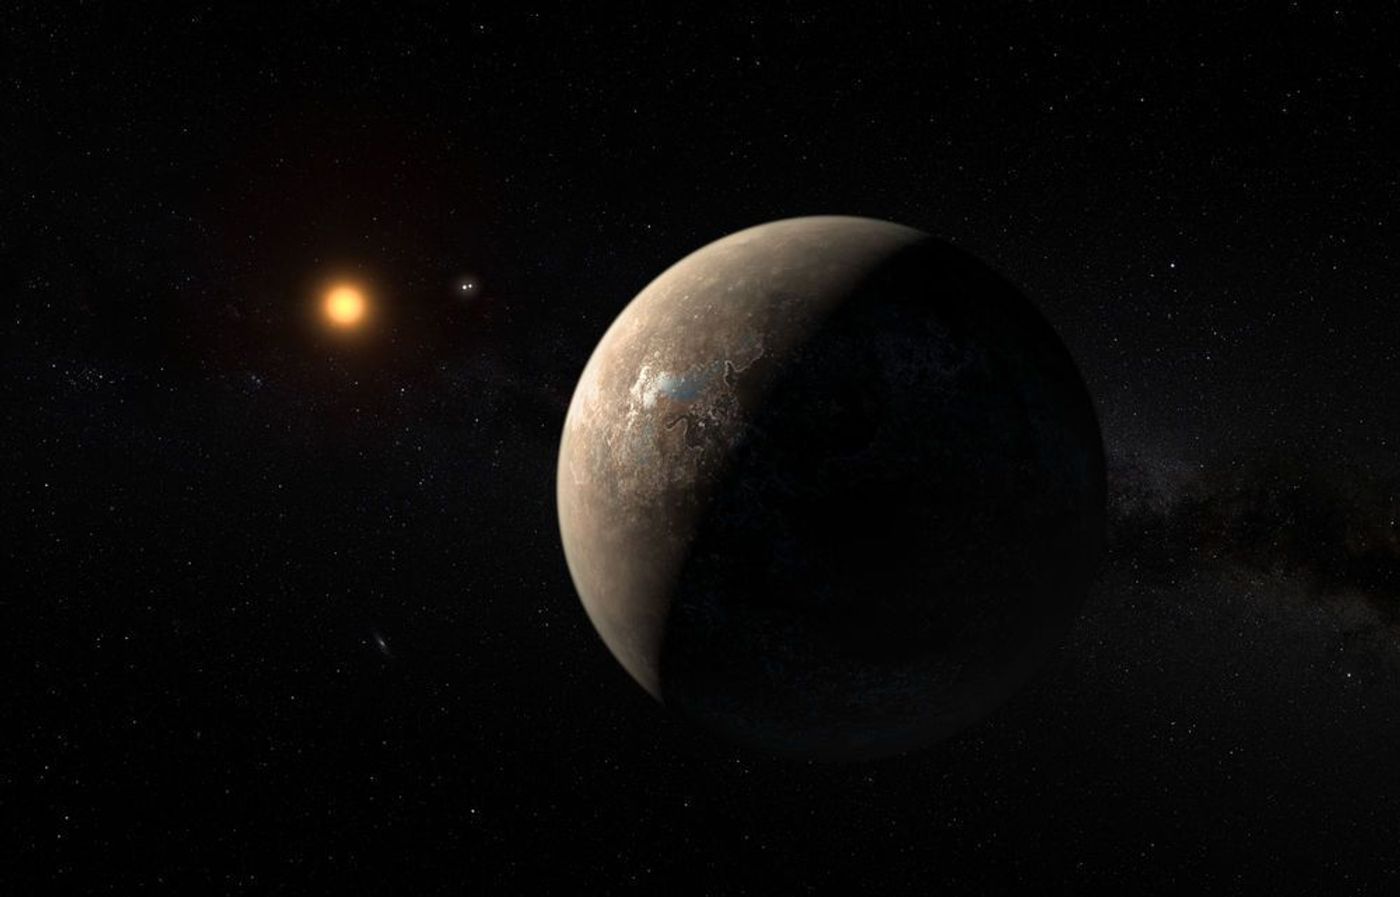 Can Proxima b support life? Possibly, but only if it has an atmosphere.